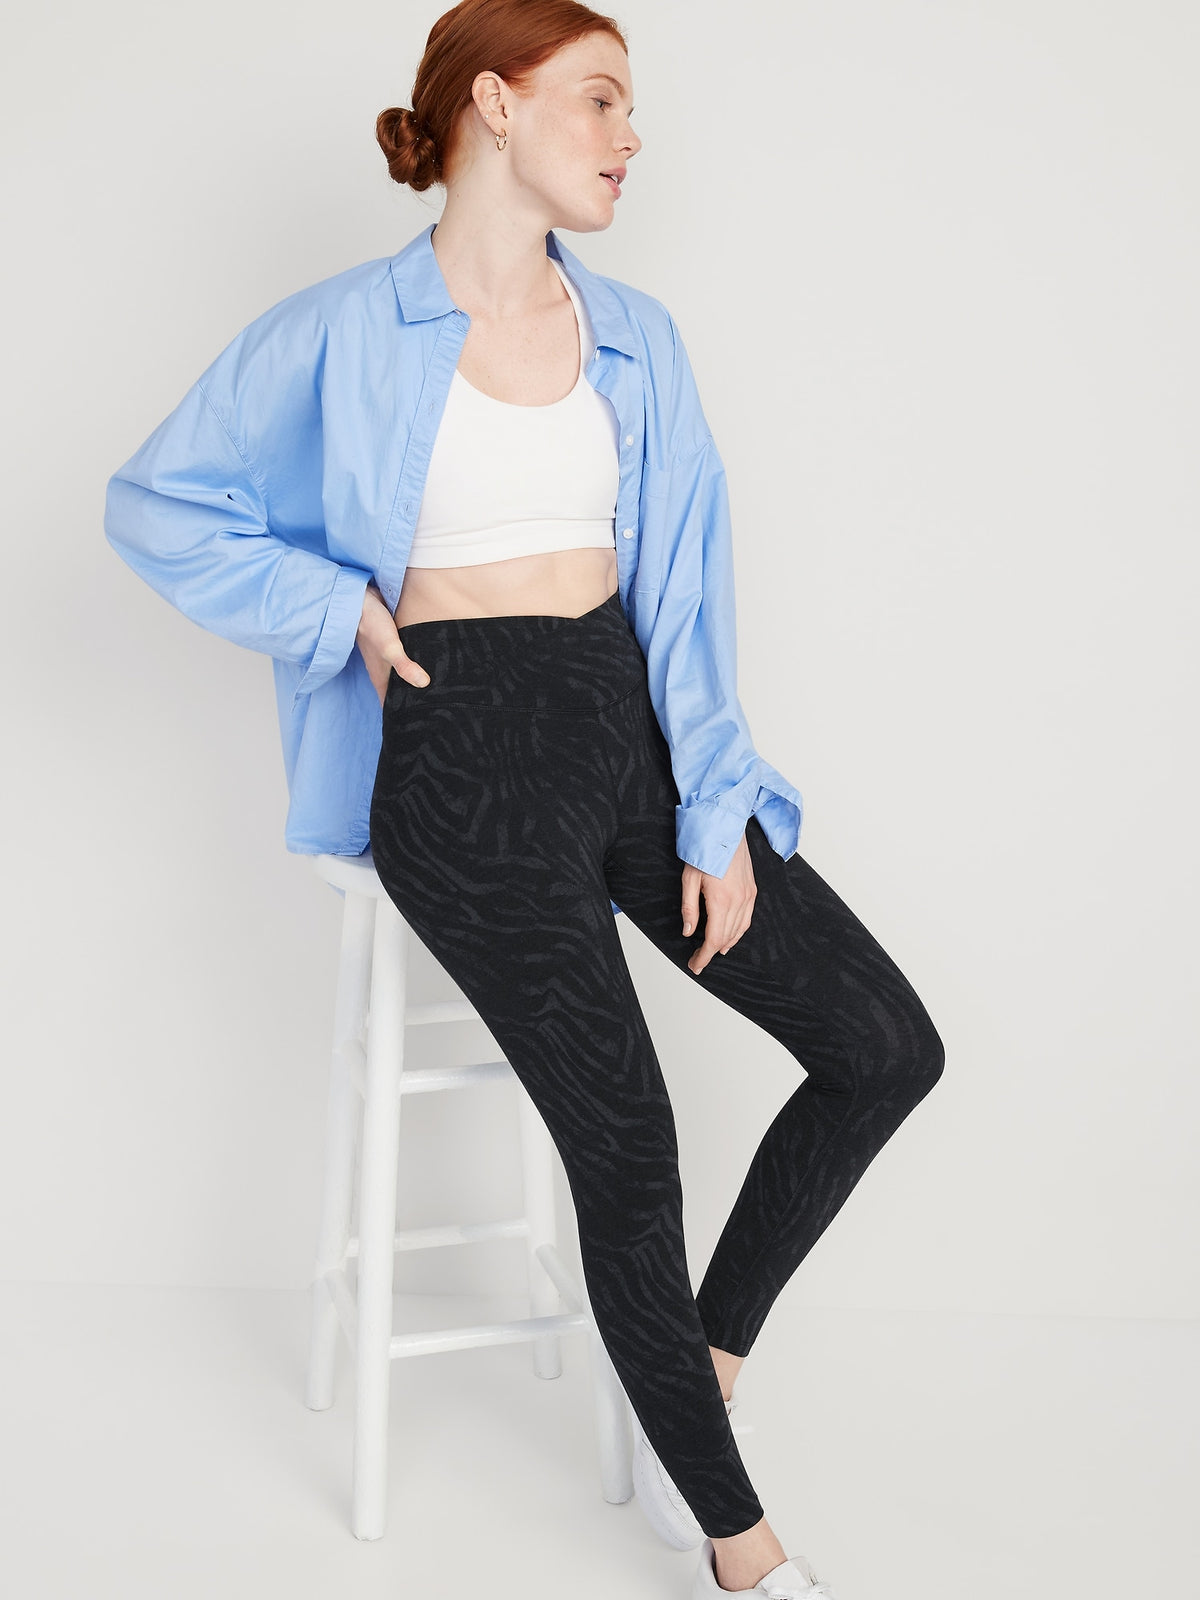 Old Navy Extra High-Waisted PowerChill Cropped Leggings for Women